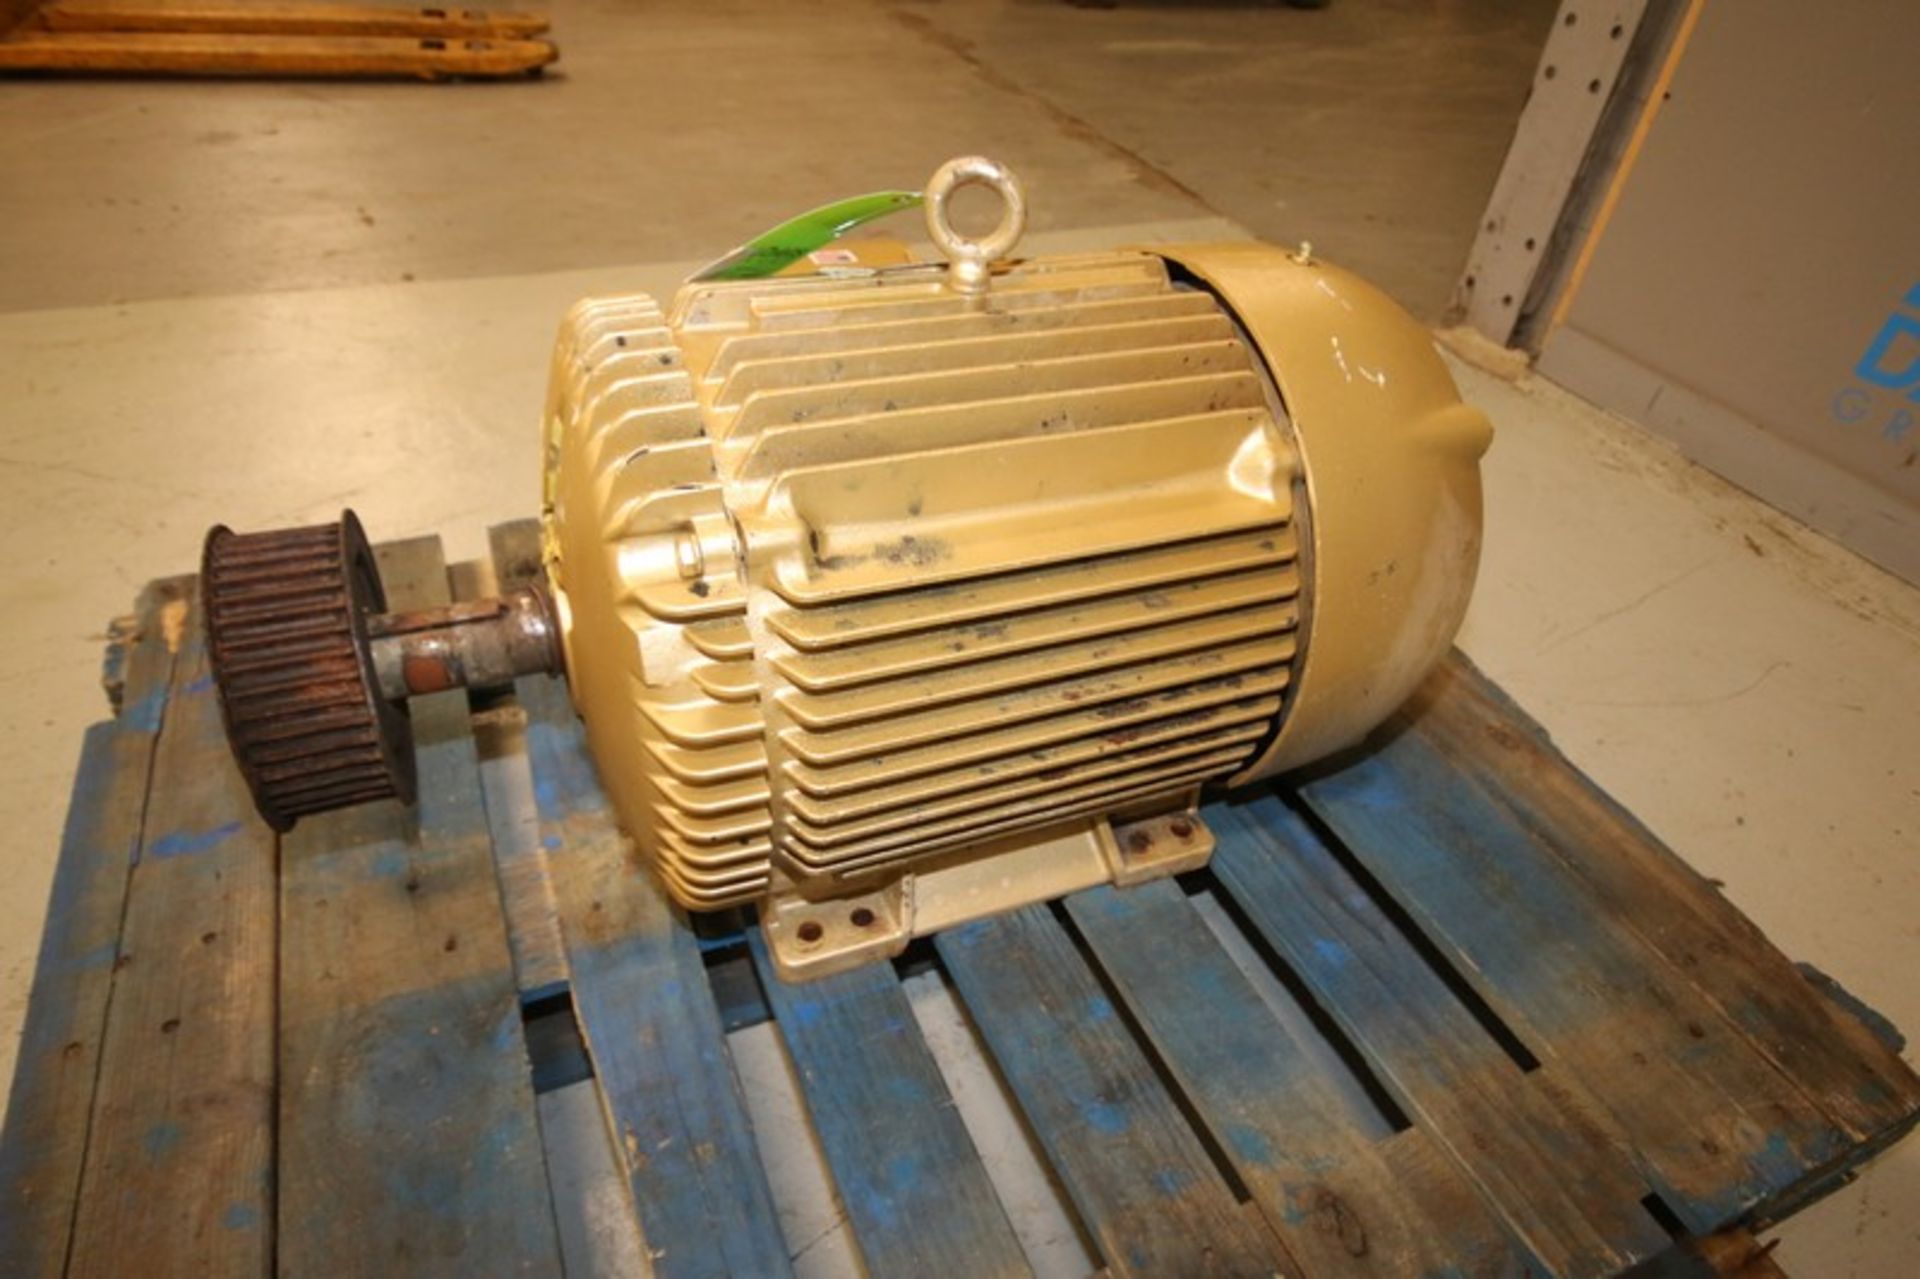 Baldor 50 hp Motor, 1775 rpm, Frame 326T, 208-230/460V (INV#87077)(Located @ the MDG Auction - Image 2 of 3